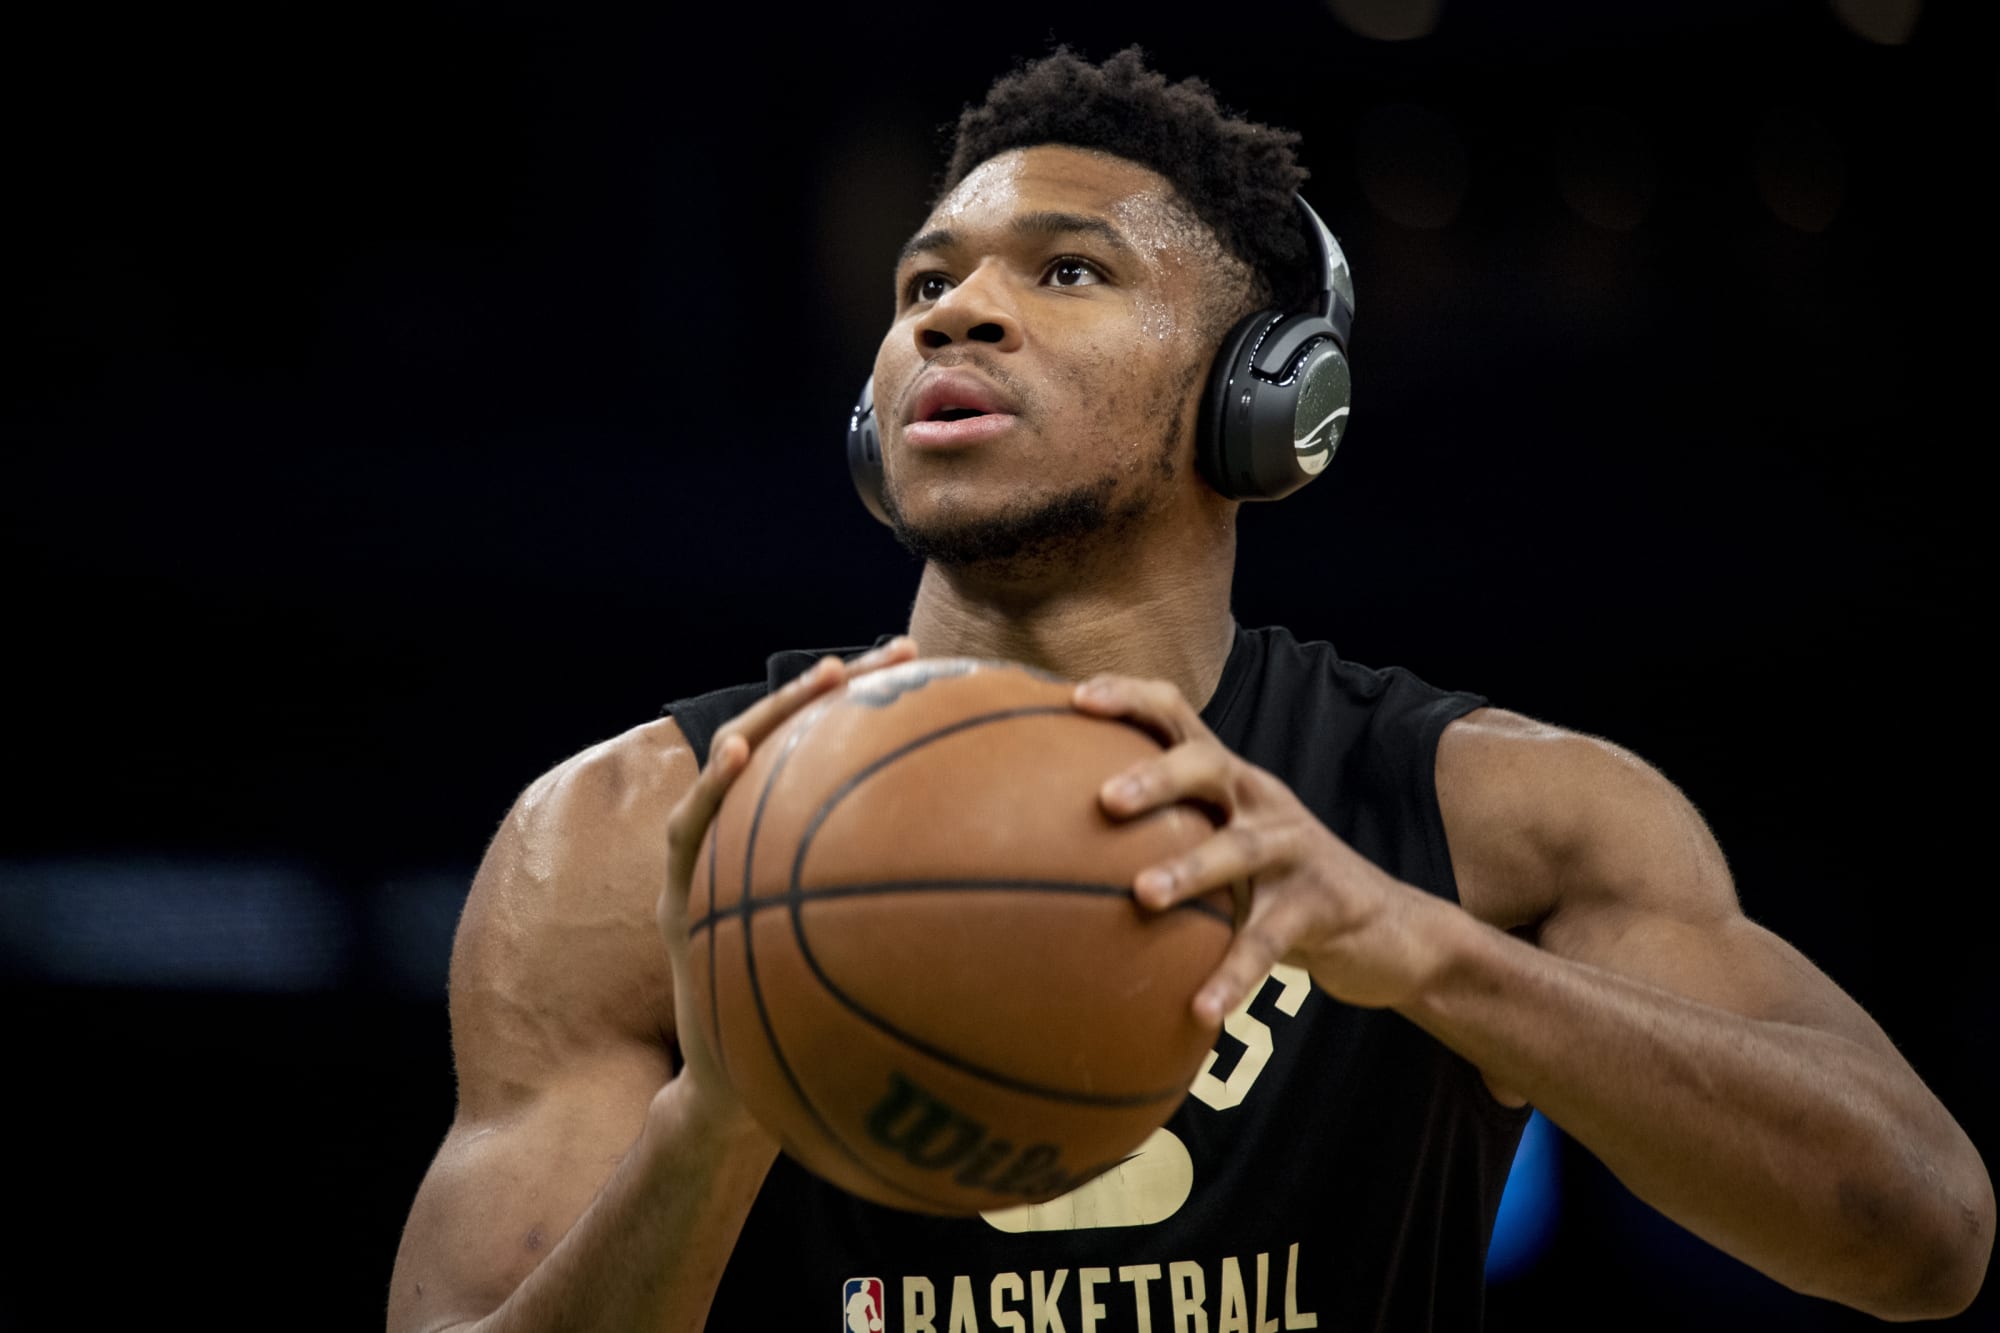 4th consecutive, unanimous All-NBA selection makes Giannis one-of-a-kind